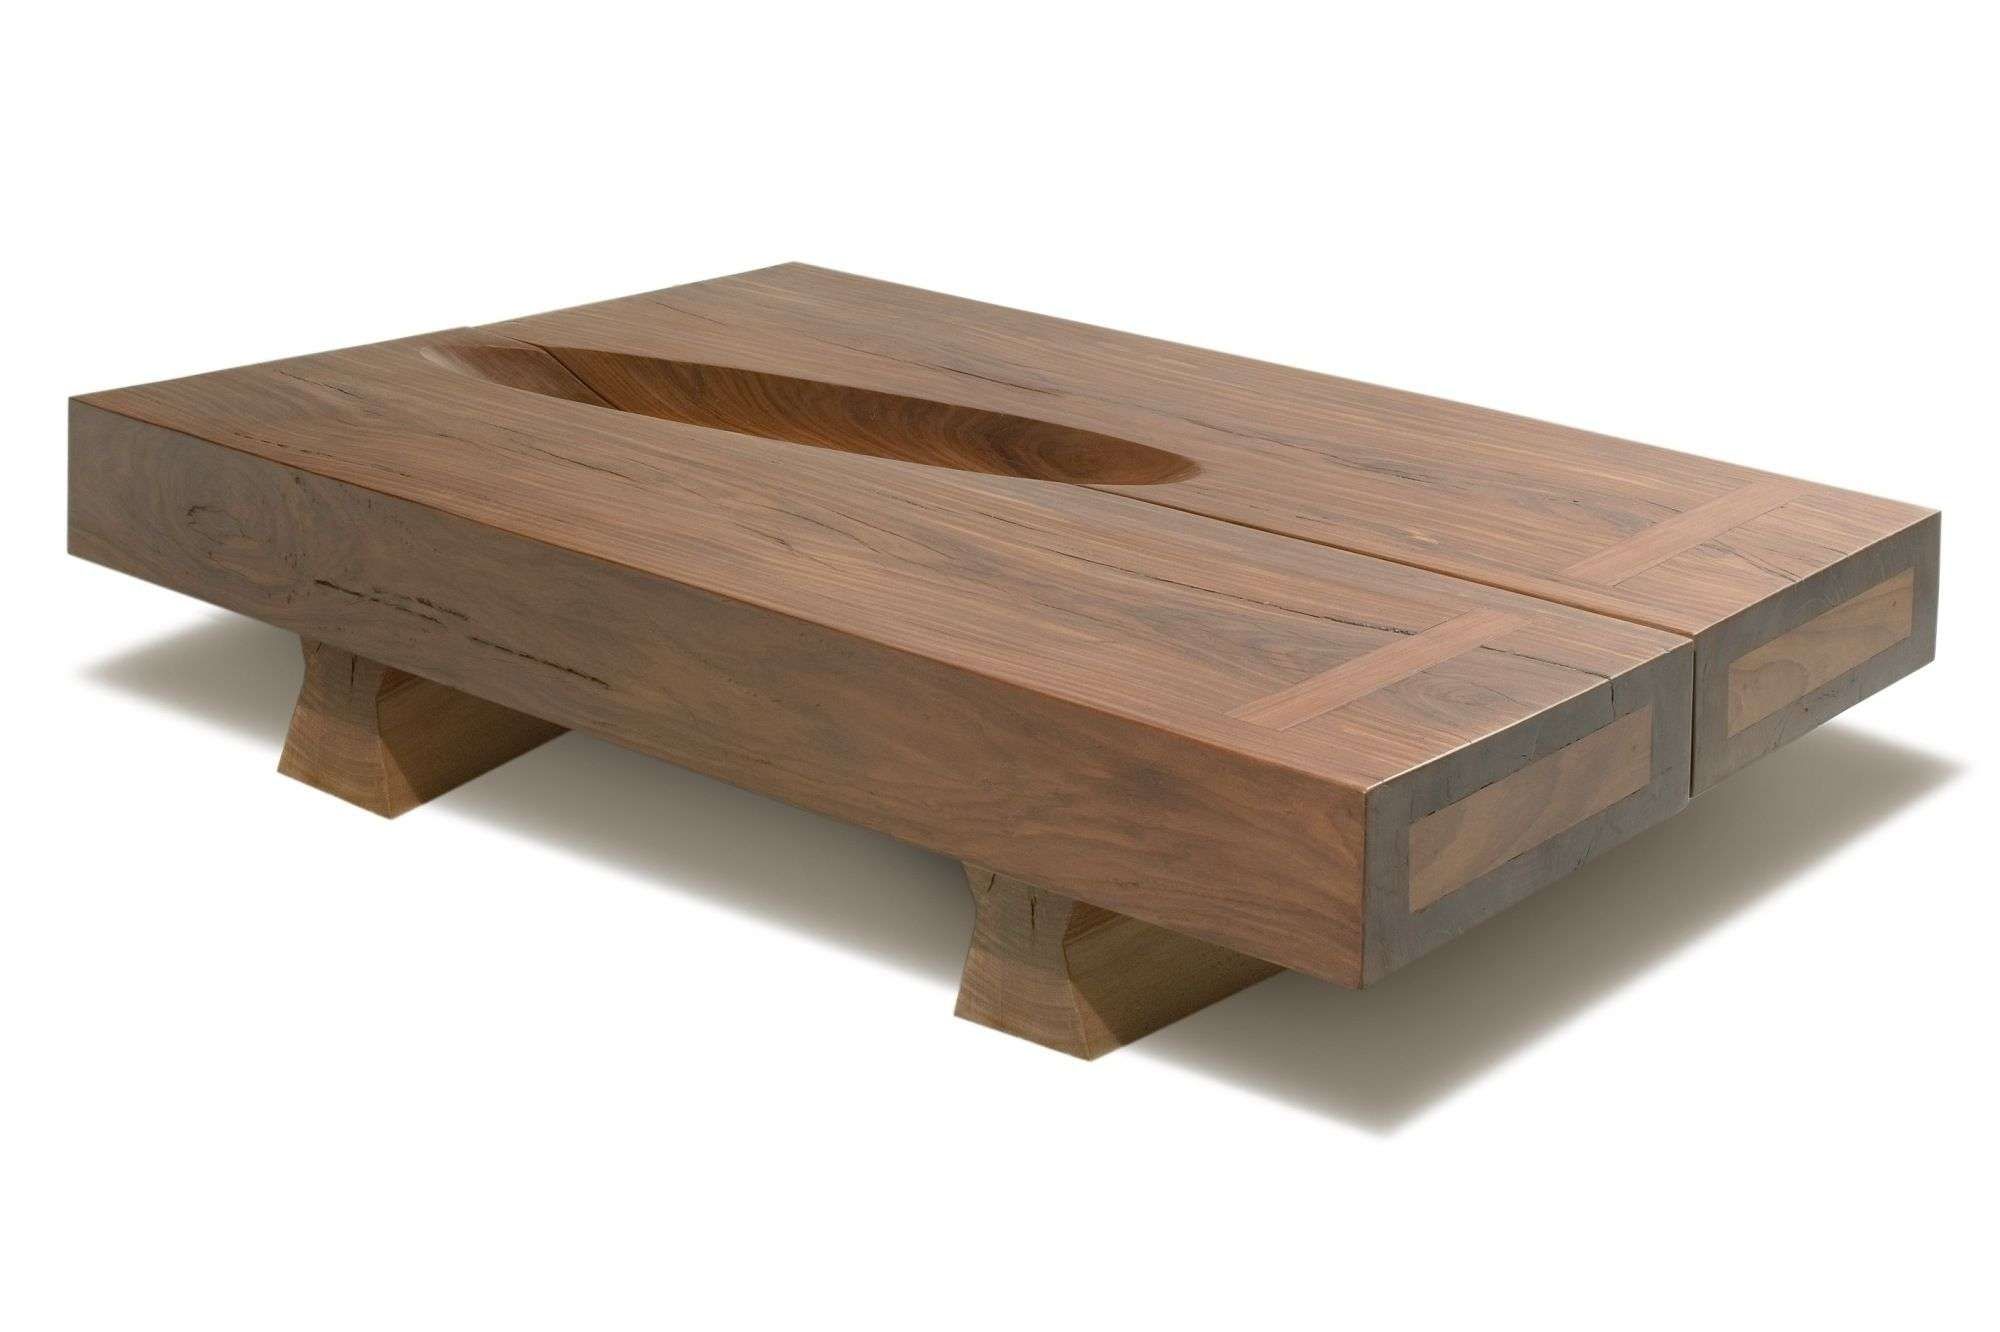 Coffee Table : Awesome Wood Square Coffee Table Cherry Wood Coffee Within Popular Low Wooden Coffee Tables (View 6 of 20)